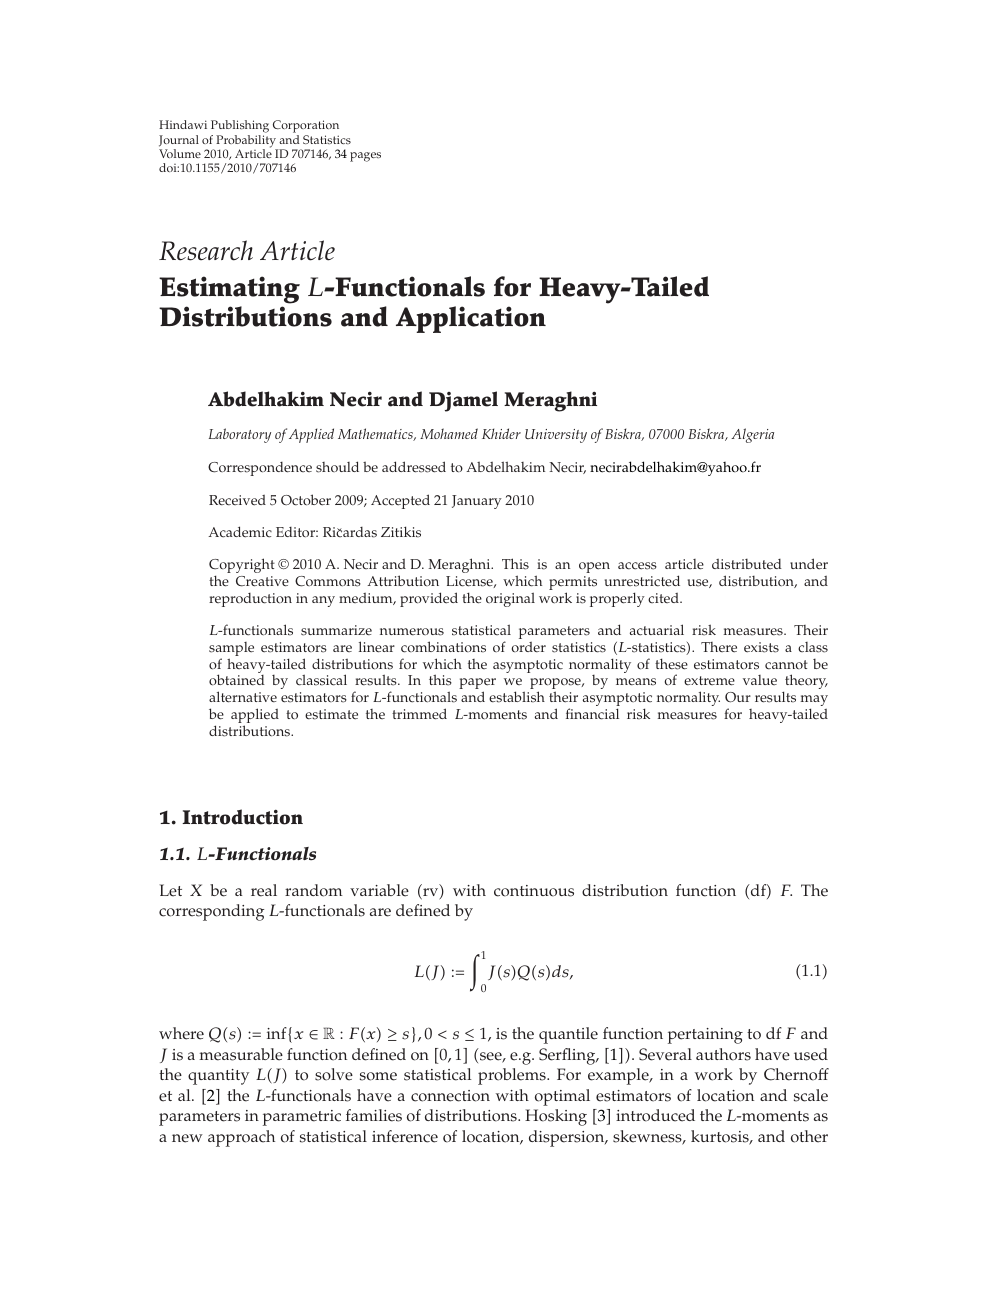 Estimating 𝐿 Functionals For Heavy Tailed Distributions And Application Topic Of Research Paper In Mathematics Download Scholarly Article Pdf And Read For Free On Cyberleninka Open Science Hub